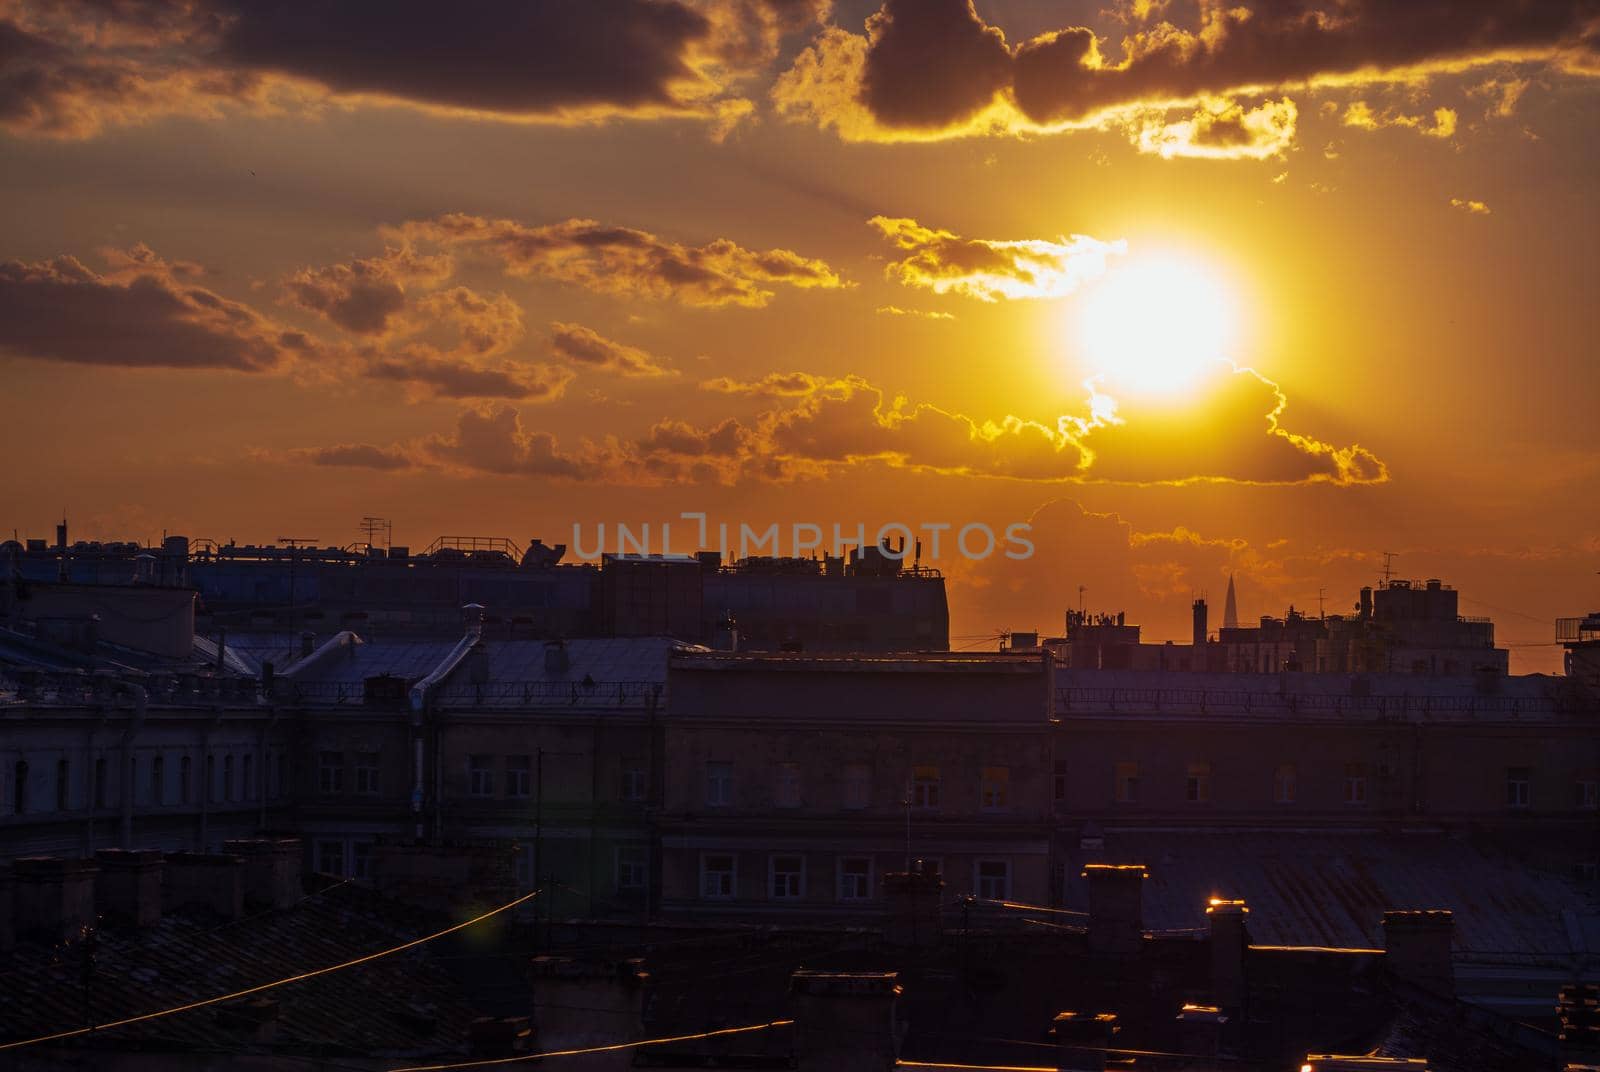 Cityscape view over the rooftops of St. Petersburg by Andre1ns